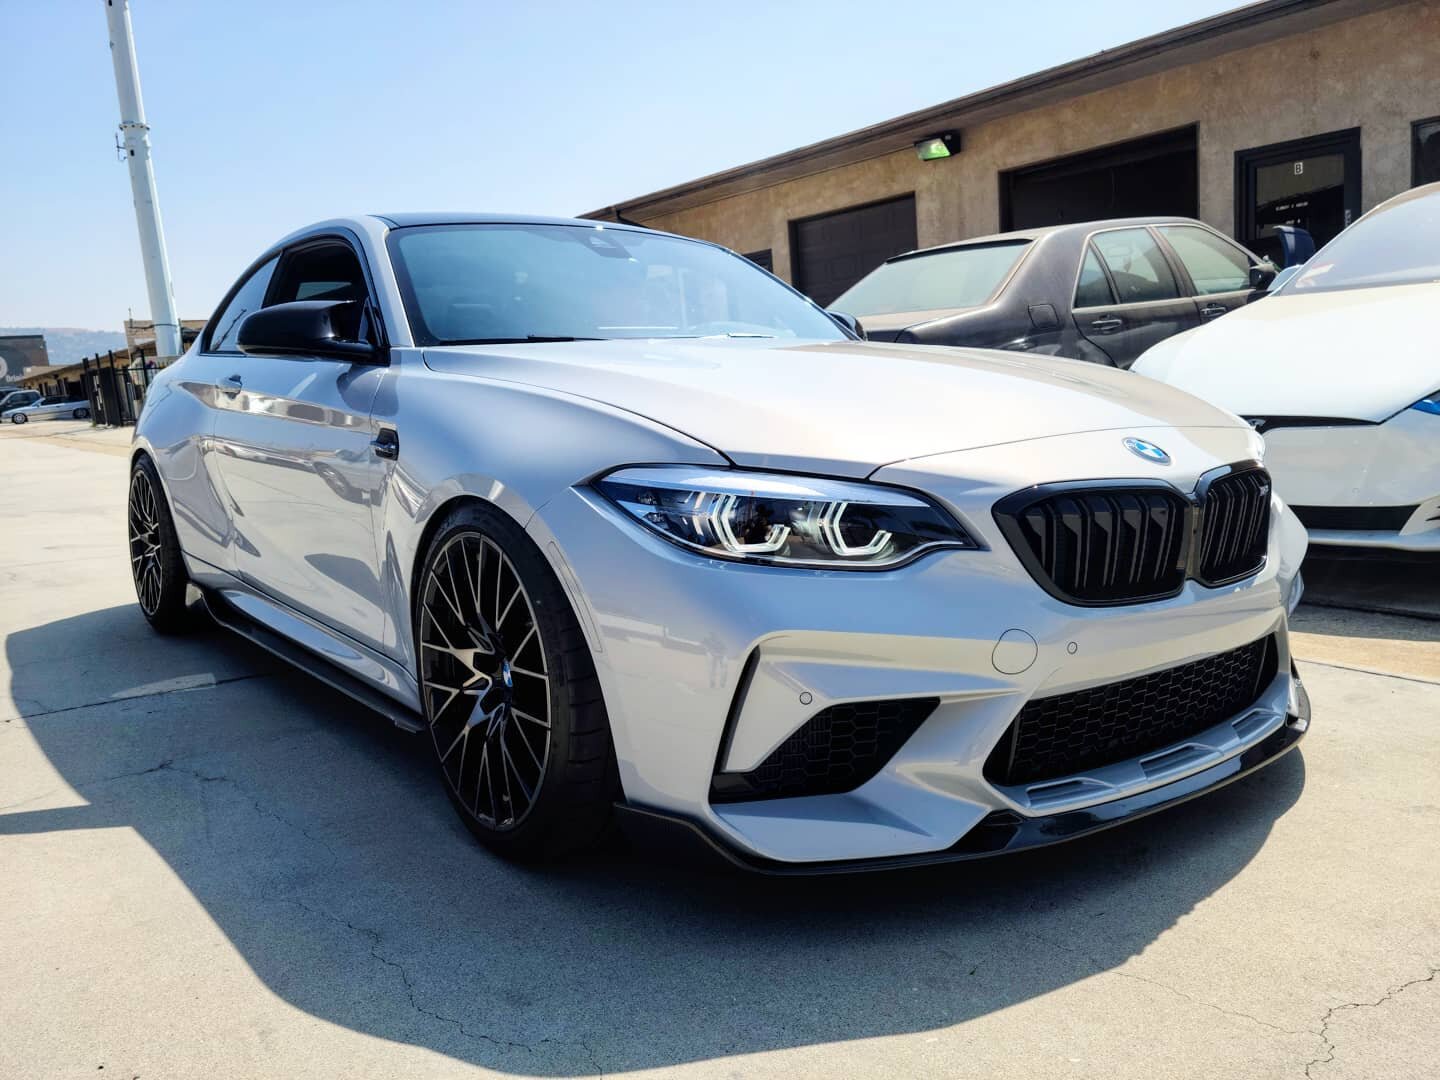 @aeroluxe_autoboutique carbon fiber lipbkit installed M2 Comp

Any carbon fiber needs give us a DM. 
🔹🔹🔹🔹🔹🔹🔹🔹🔹🔹🔹🔹🔹🔹🔹🔹🔹🔹🔹🔹
#cars #carlife #carlifestyle #instacar #carsofinstagram #carstagram #carswithoutlimits #bmw #bmwgram #bmw2se